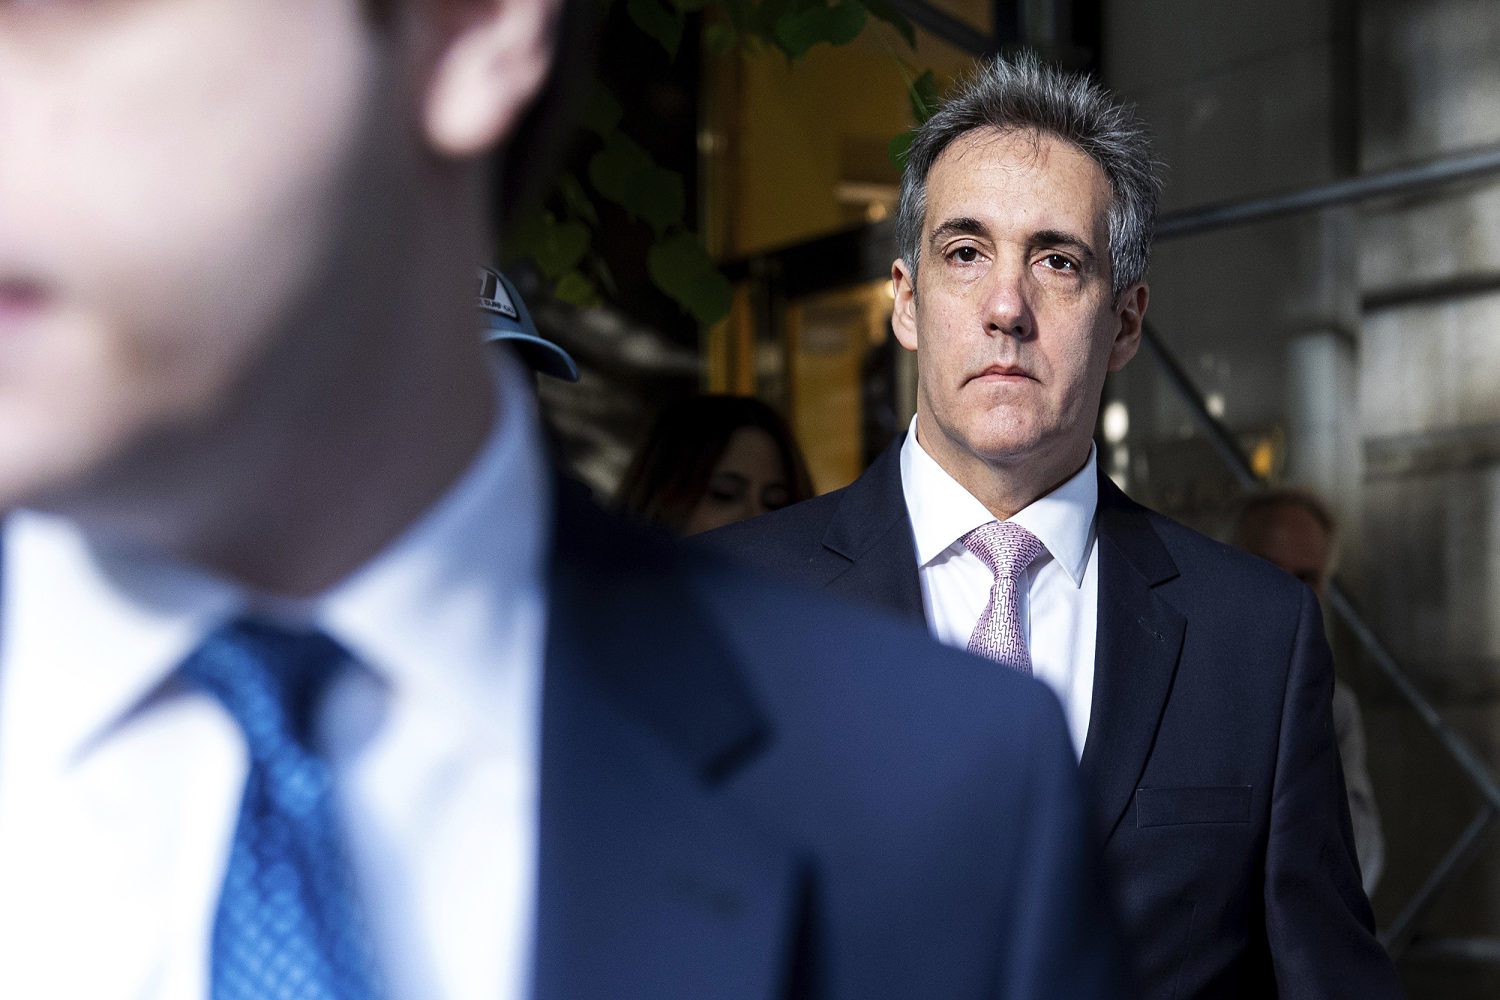 Star witness Michael Cohen takes the stand at Trump's hush money trial